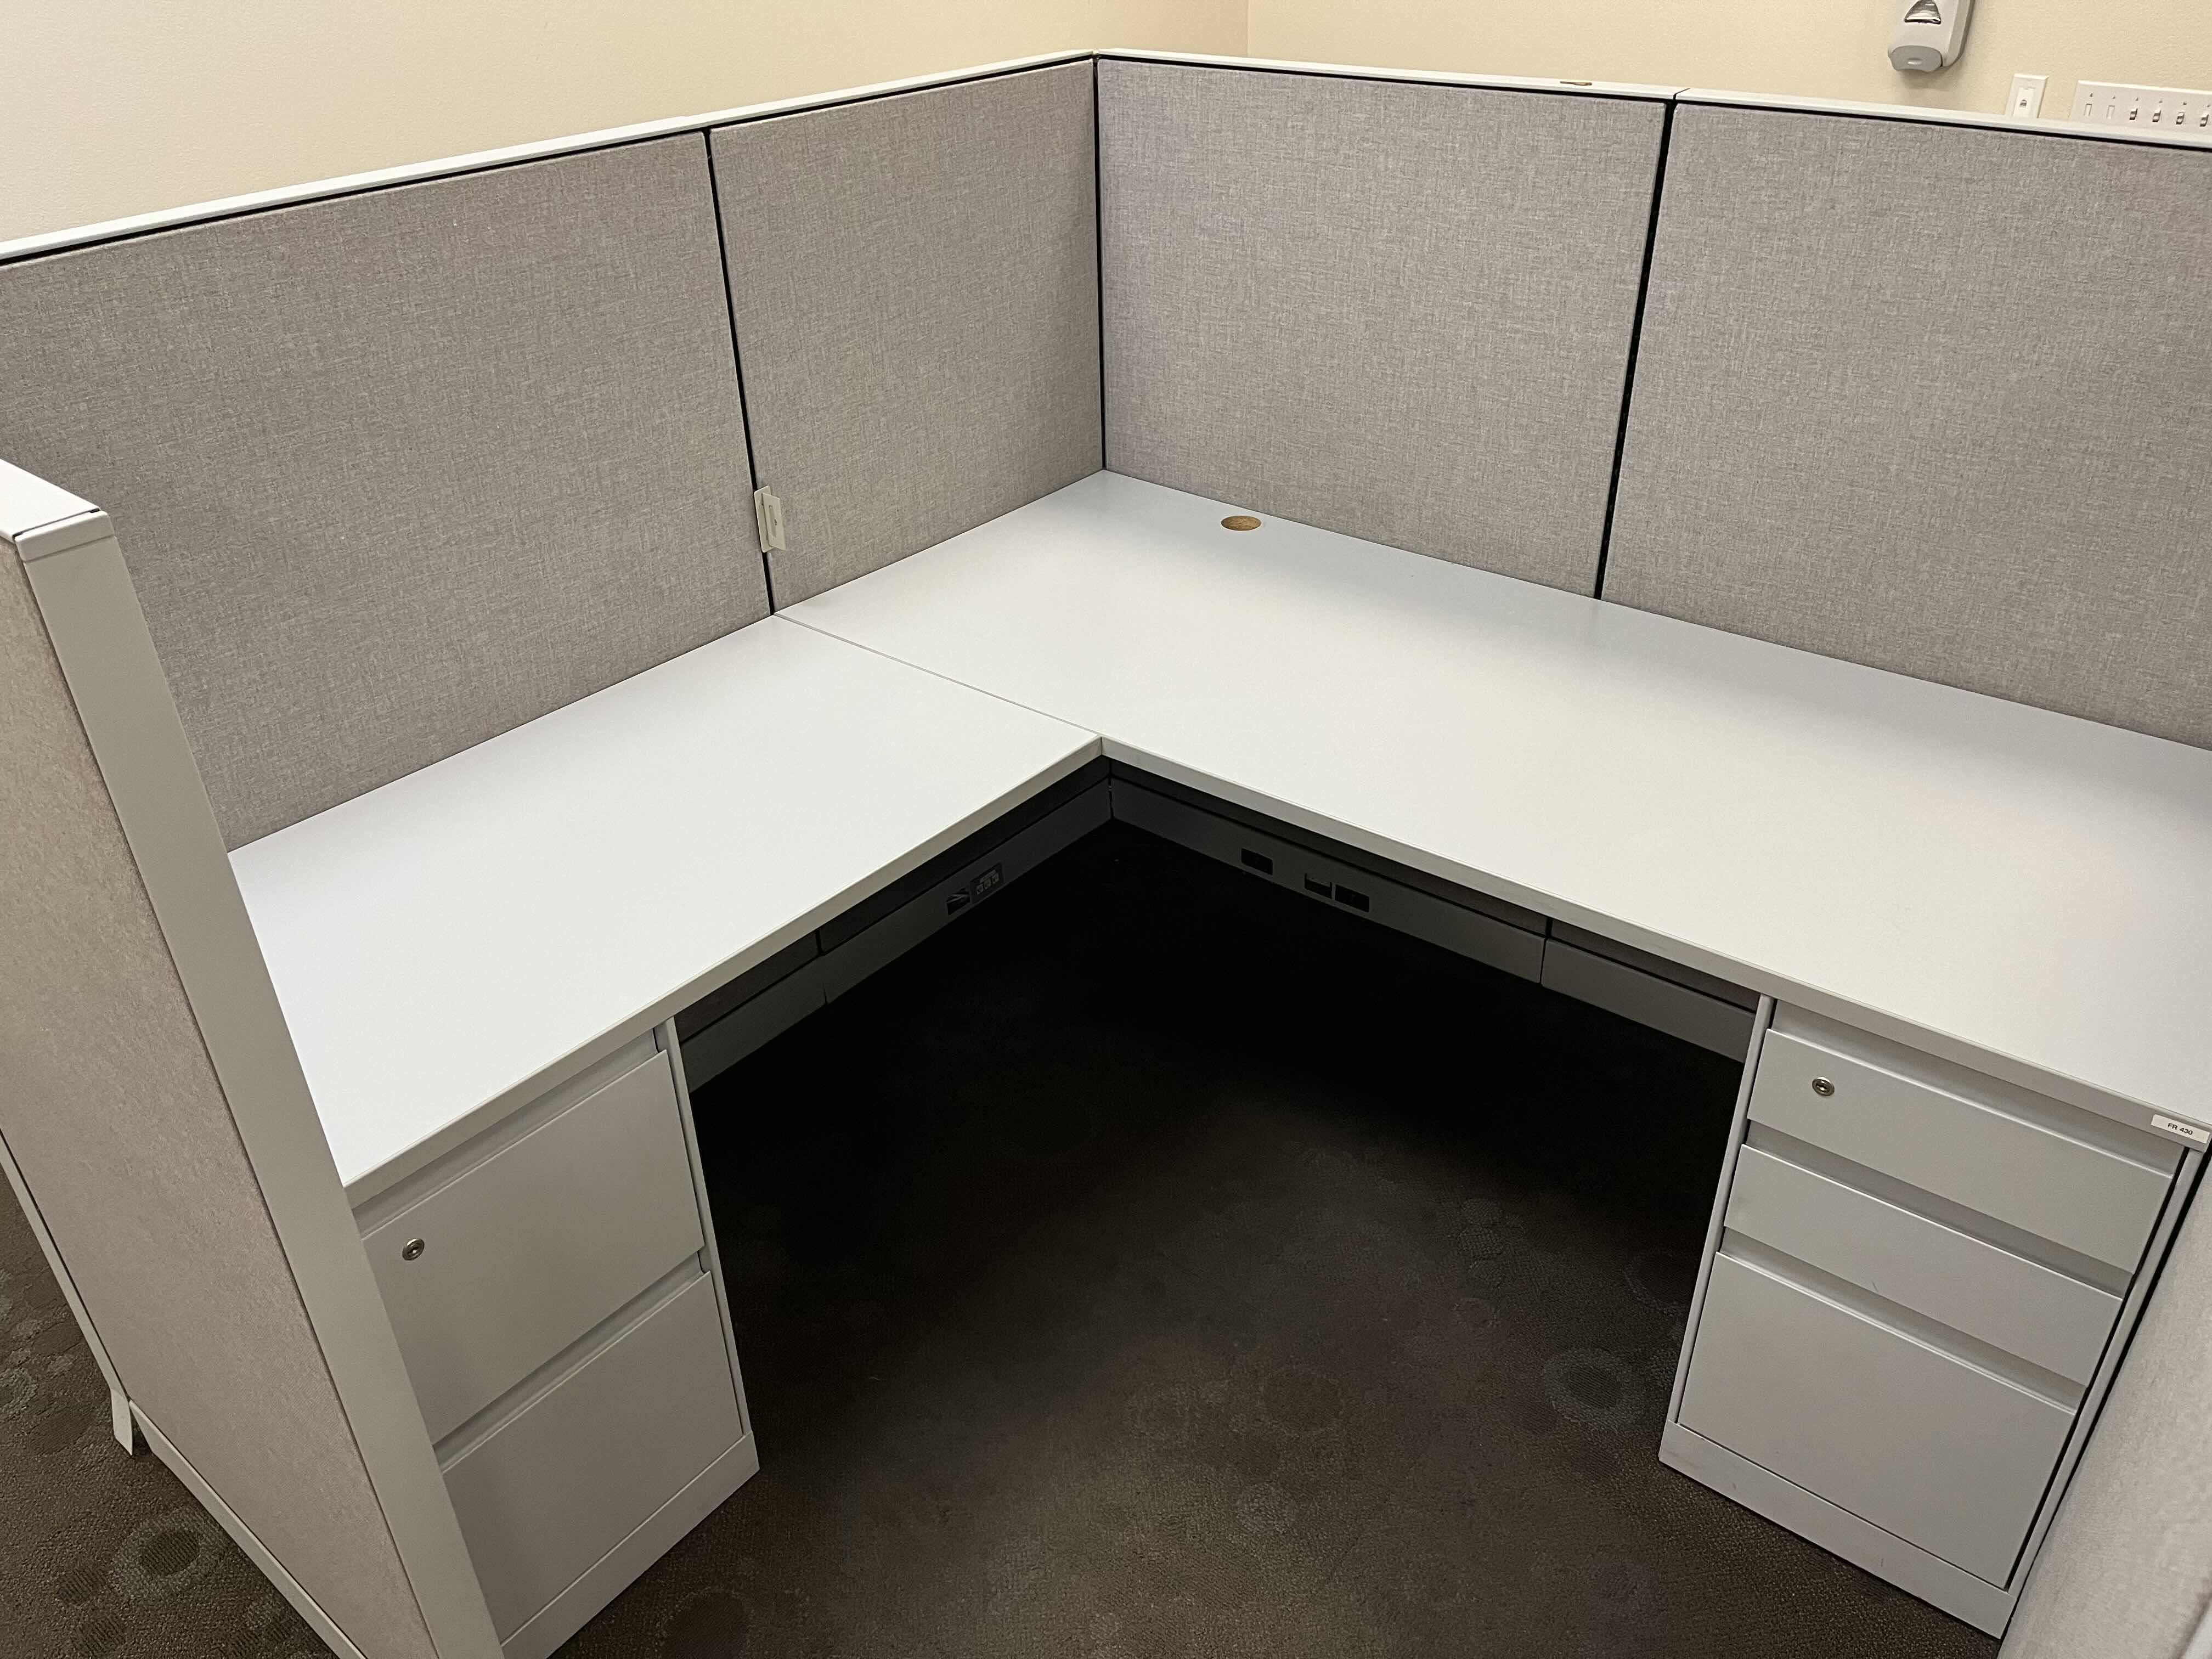 Photo 1 of STEELCASE BUILT IN CUBICLE L SHAPE 5 DRAWER OFFICE DESK 72” X 72” H27.5” W 4 CUBICLE PANELS 30.5”-42” X 54”